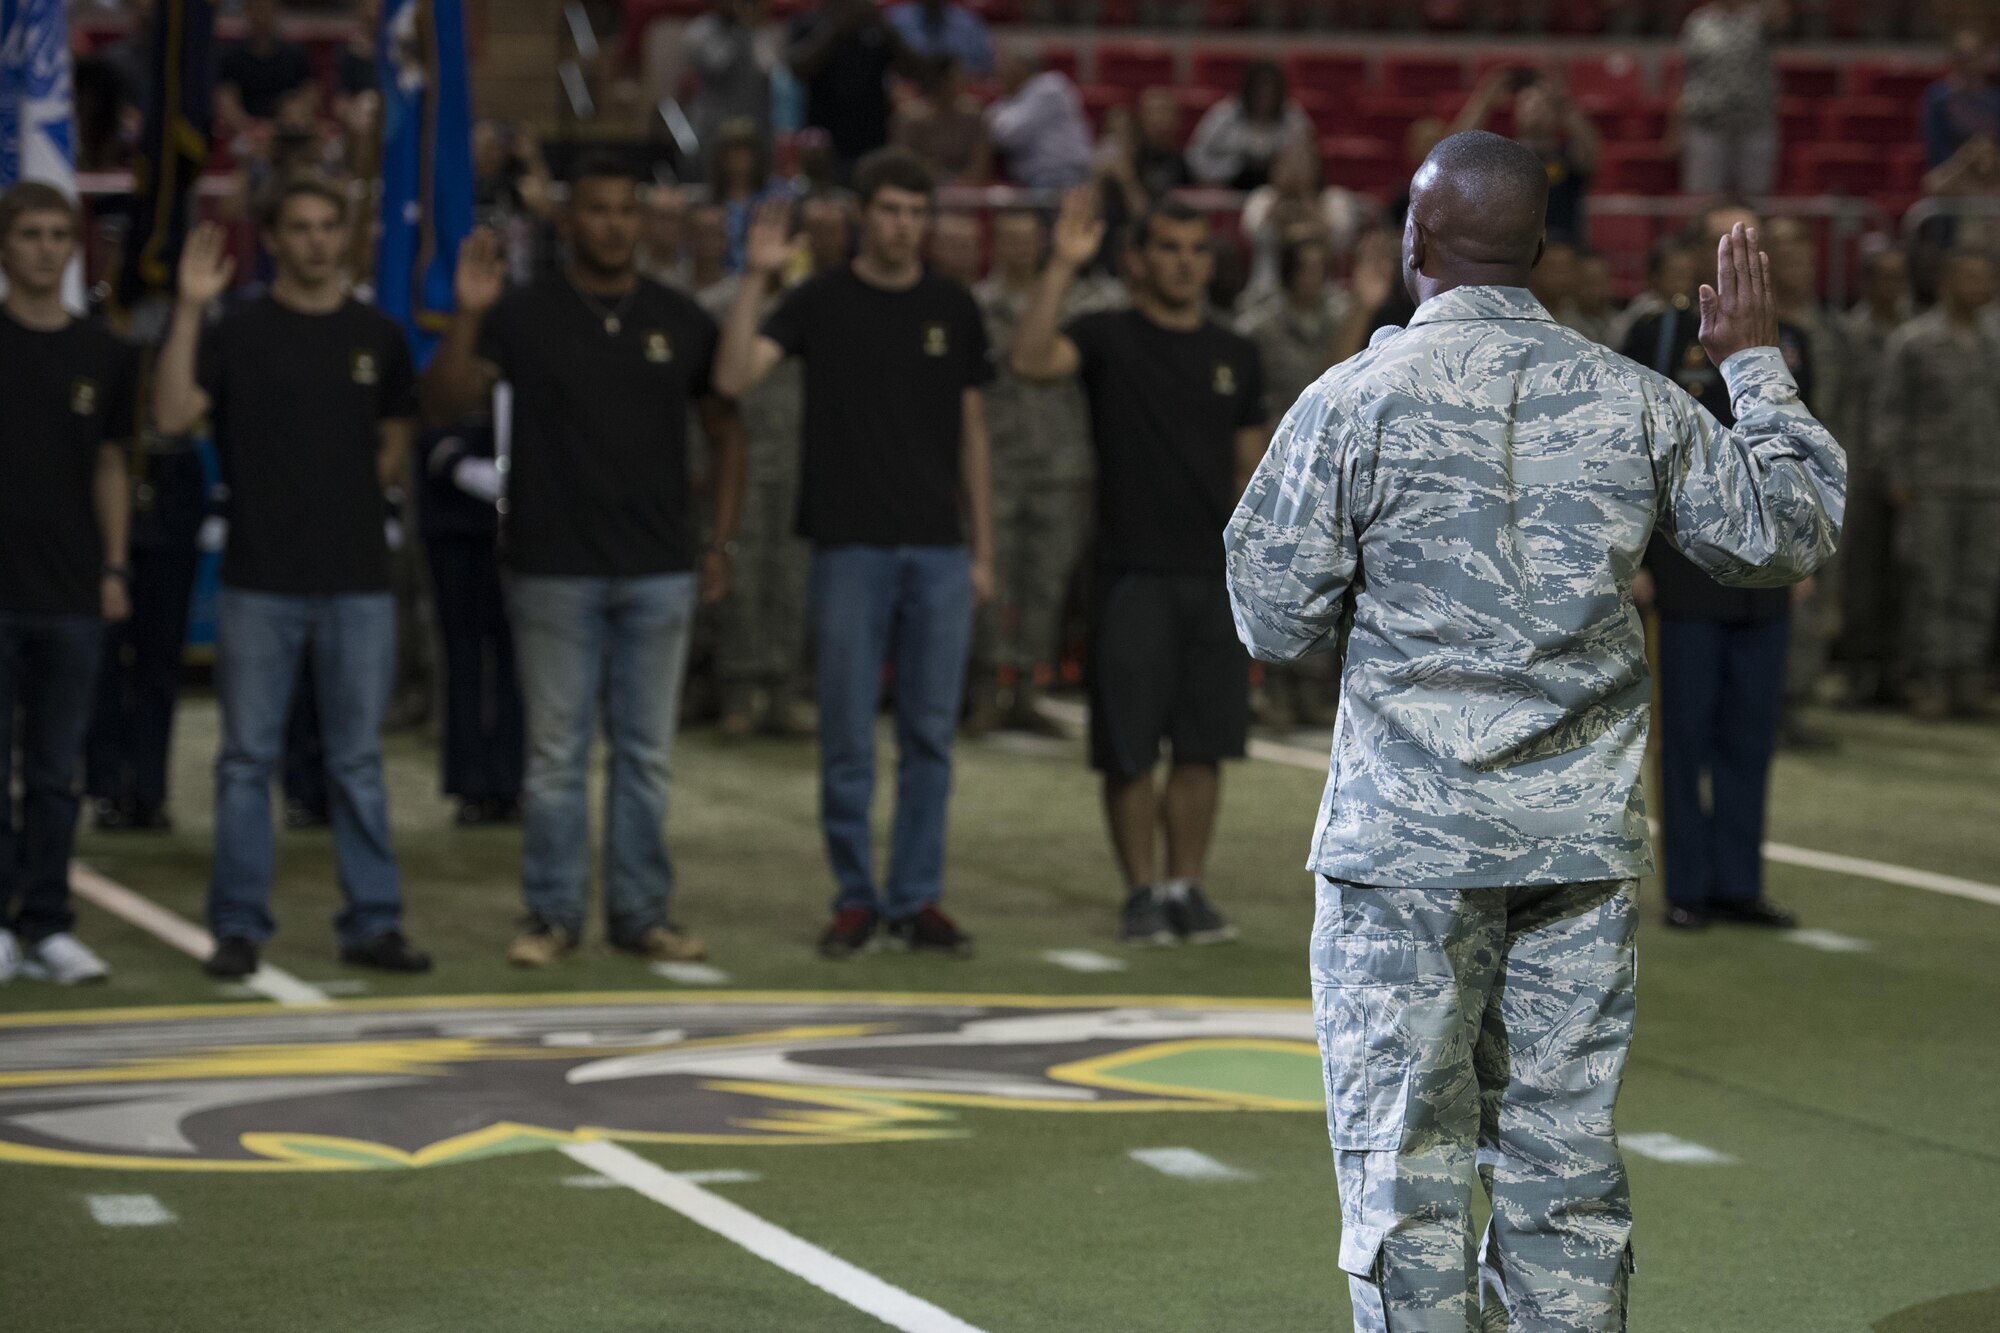 Brig. Gen. Ronald Jolly Sr., 82nd Training Wing commander, administers the oath of enlistment to future Airmen, Soldiers and Sailors during the Nighthawks military appreciation football game at the Kay Yeager Coliseum in downtown Wichita Falls, Texas, May 20, 2017. There were three U.S. Navy, six U.S. Army and three U.S. Air Force enlistees who took the oath during half-time. (U.S. Air Force photo by Staff Sgt. Kyle E. Gese)